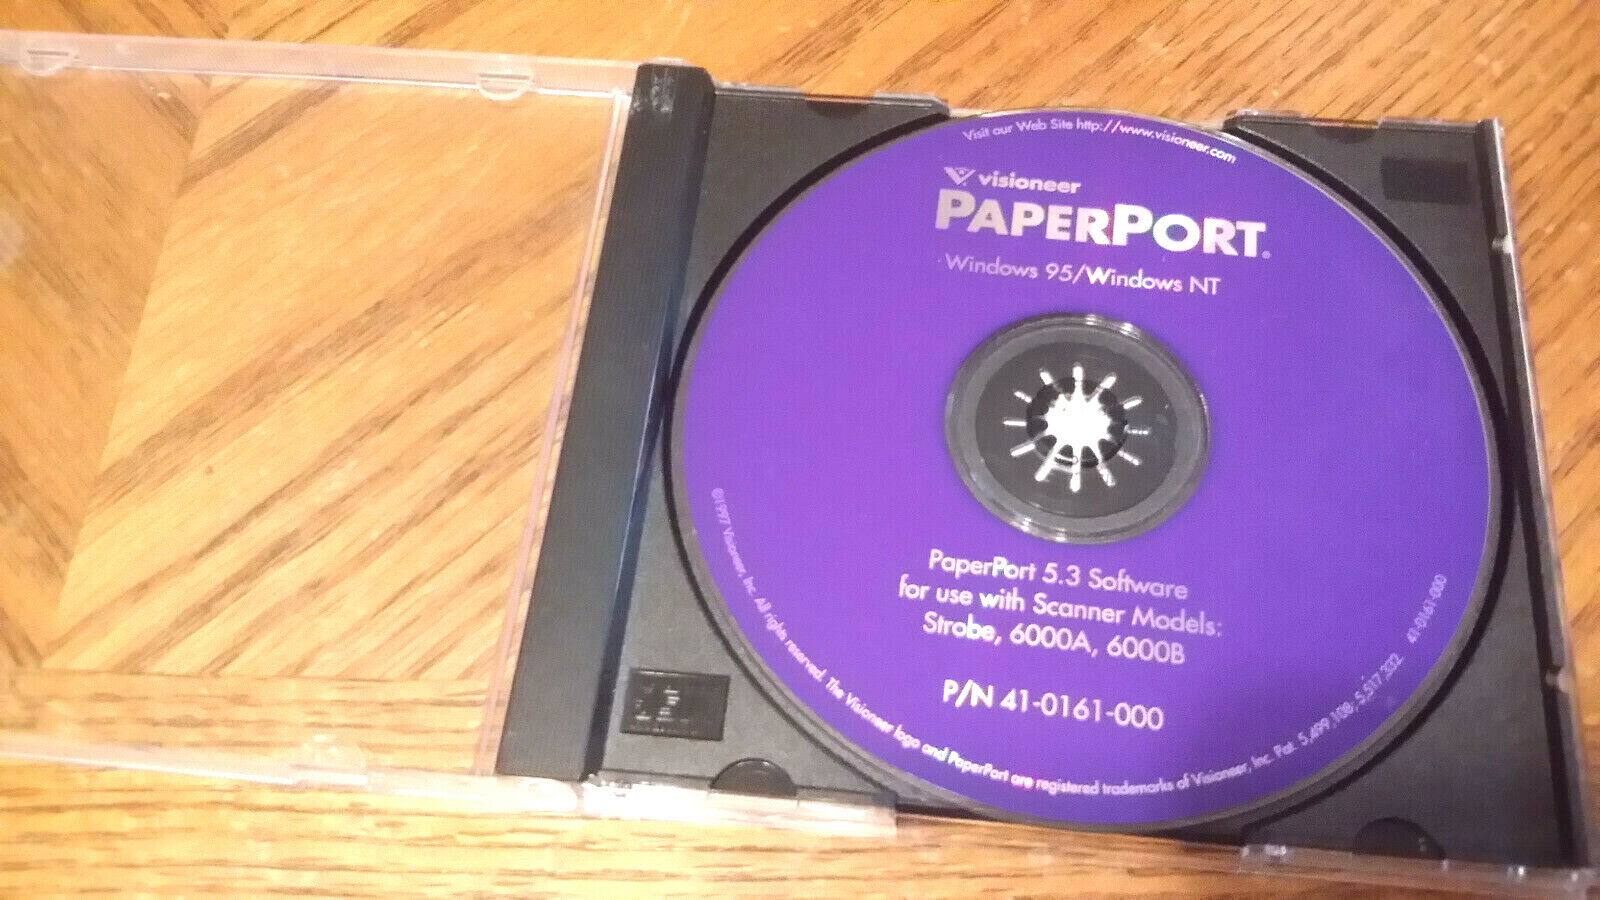 Visioneer PaperPort 1997 Windows 95/NT 5.3 Software (Sold As A Replacement Disc)